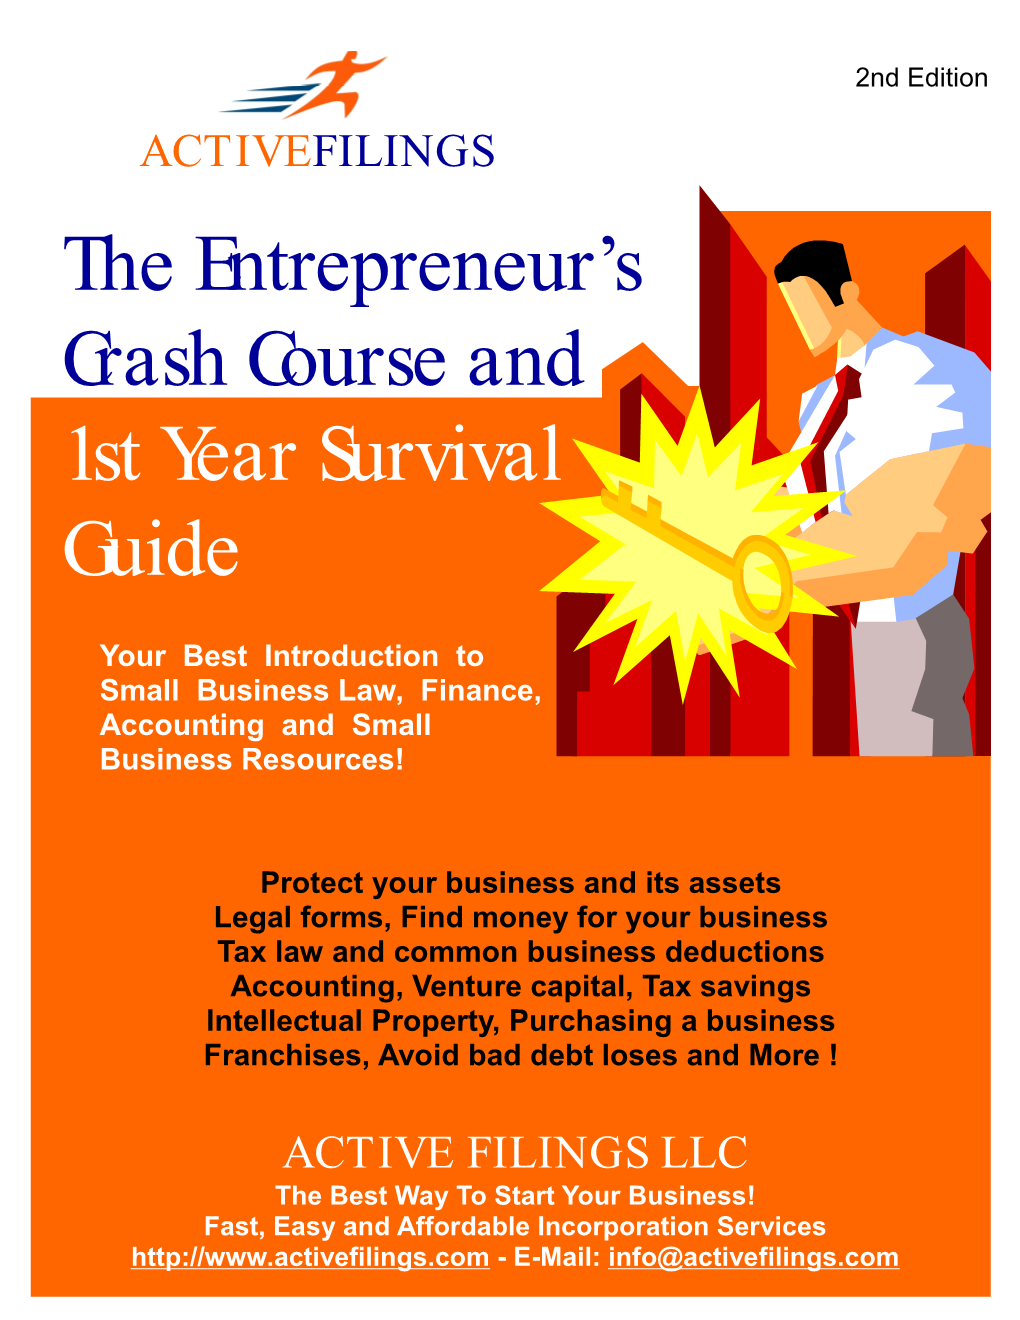 The Entrepreneur's Crash Course and 1St Year Survival Guide